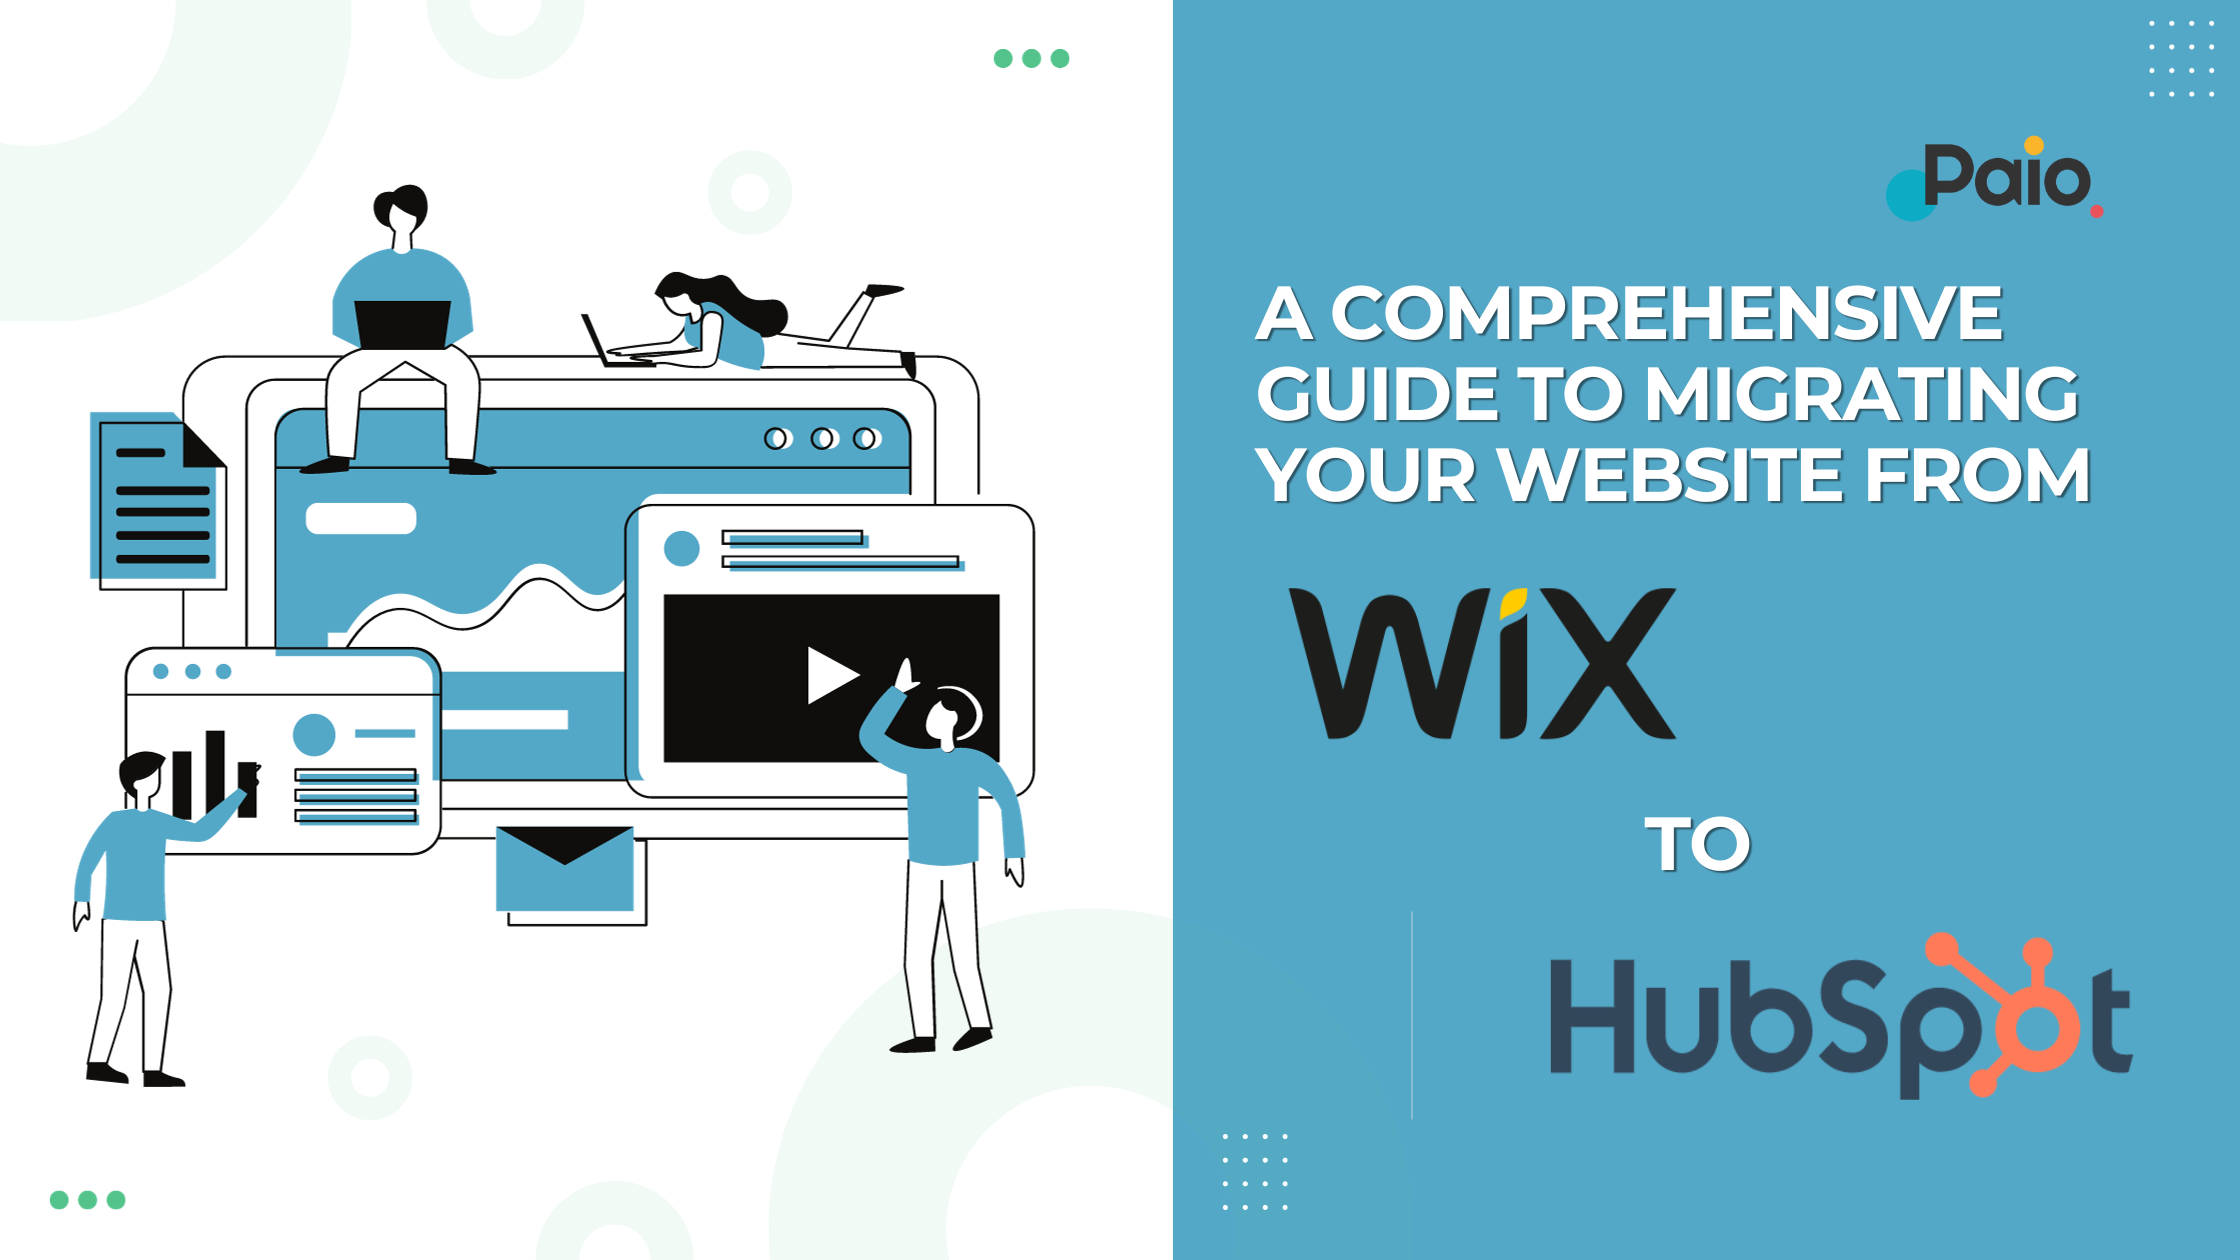 A Comprehensive Guide to Migrating Your Website from Wix to HubSpot's CMS Hub